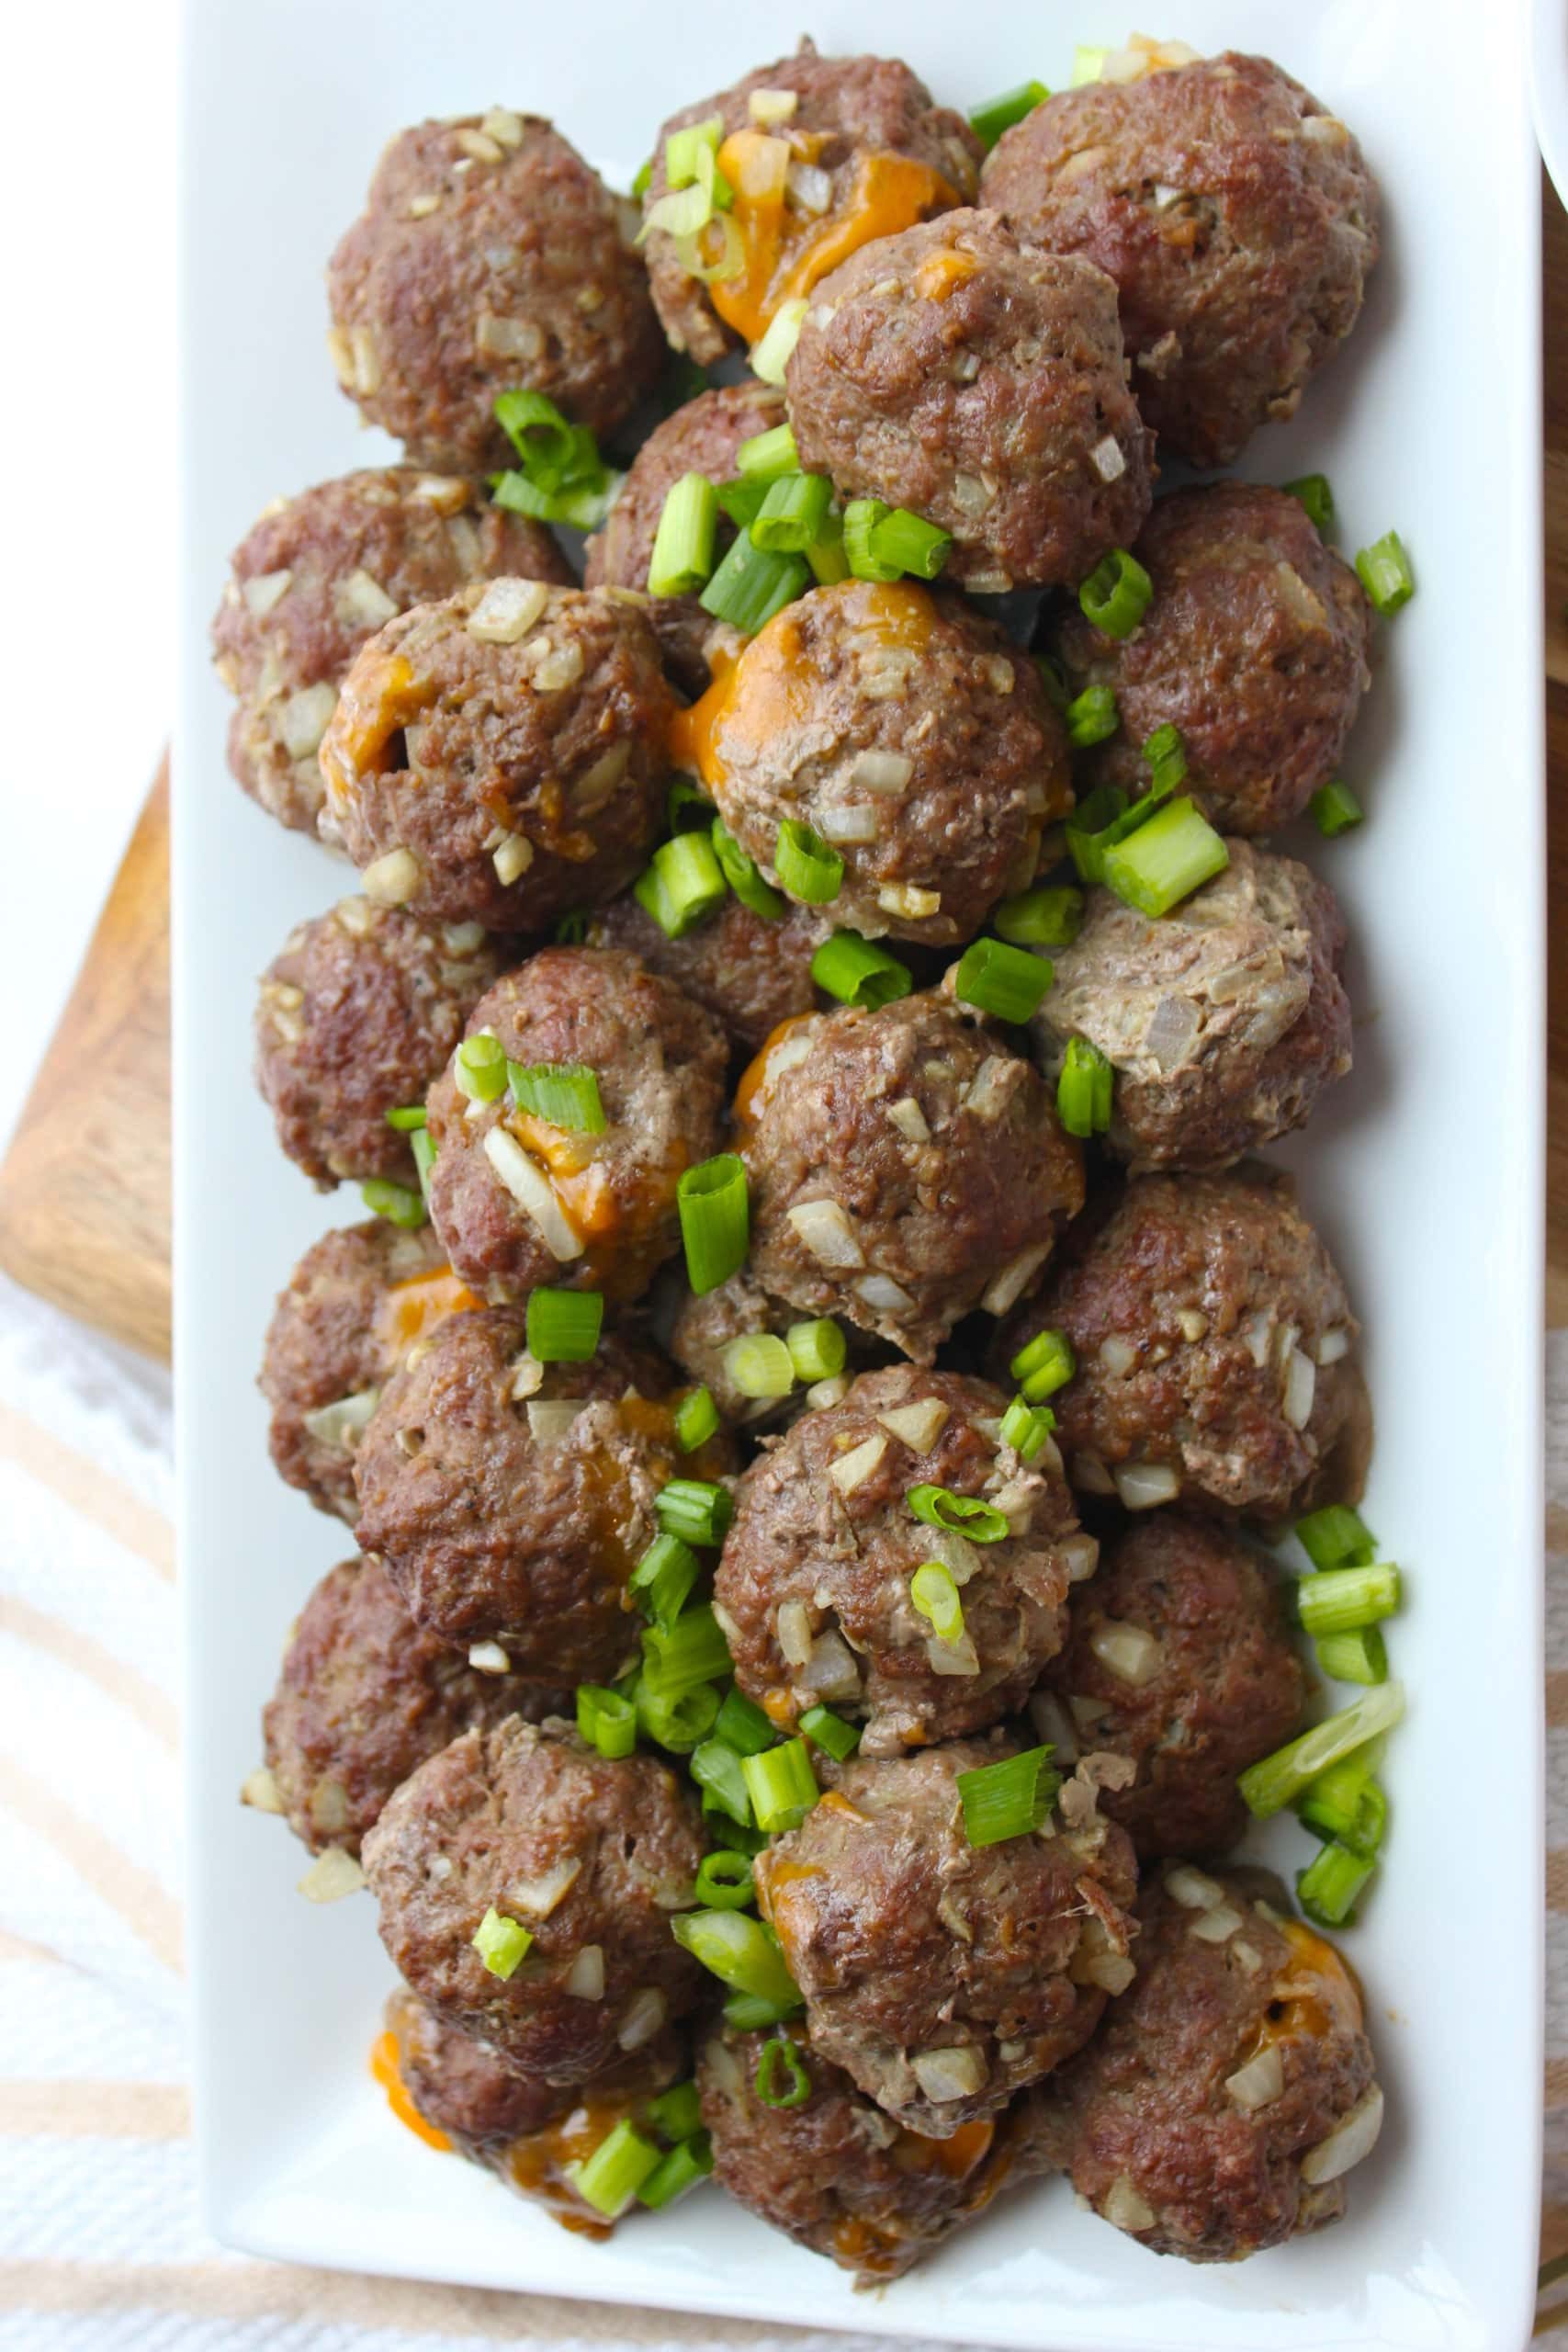 A plate of juicy Lucy meatballs topped with green onions